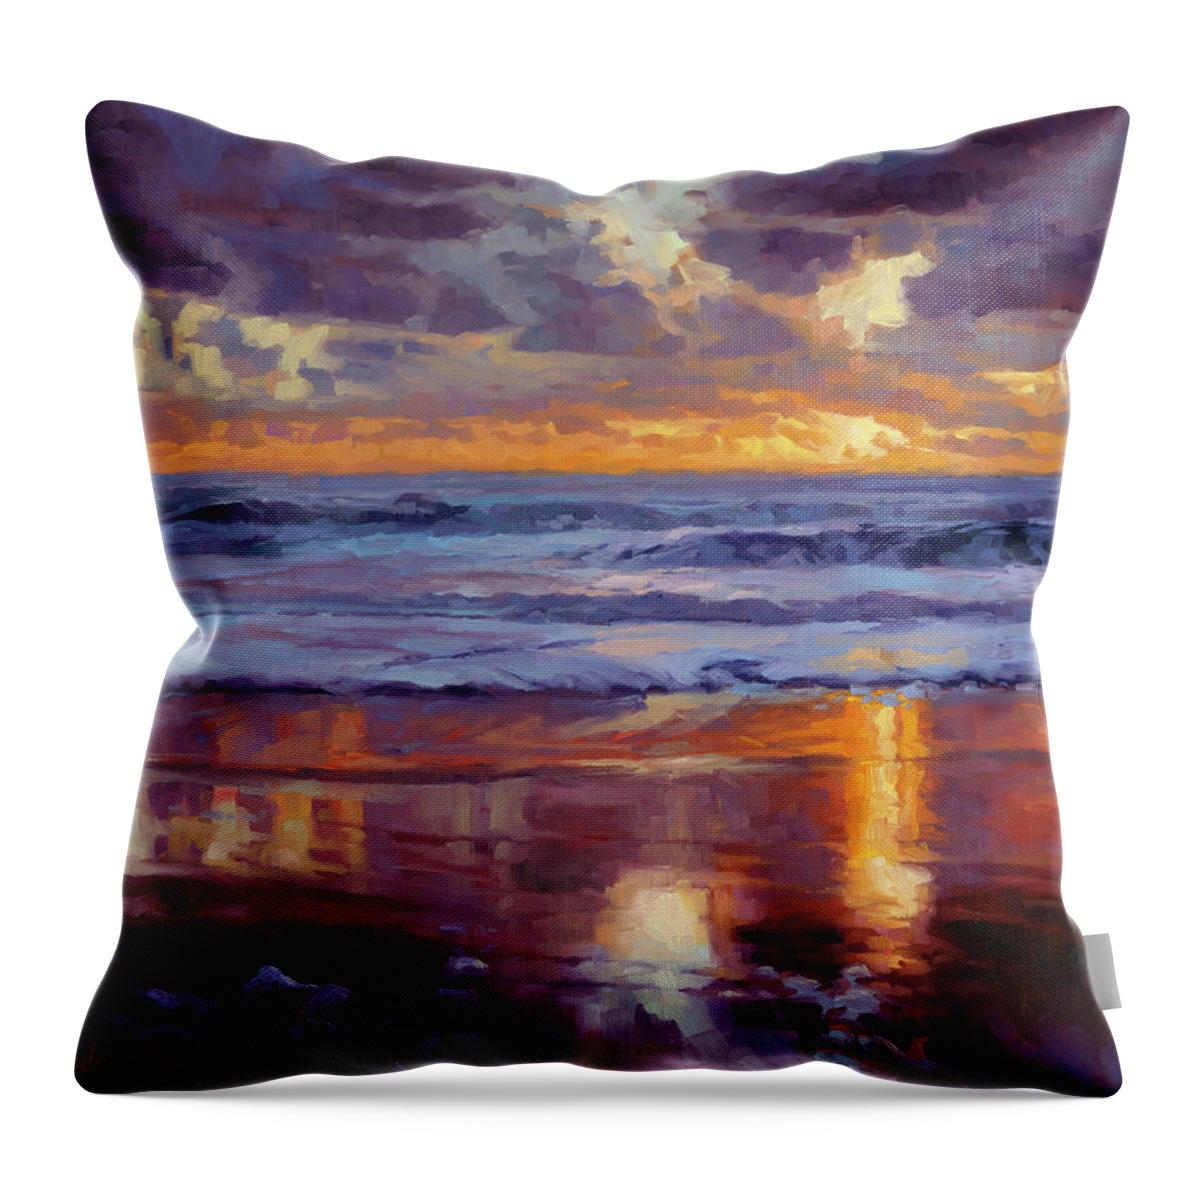 Ocean Throw Pillow featuring the painting On the Horizon by Steve Henderson